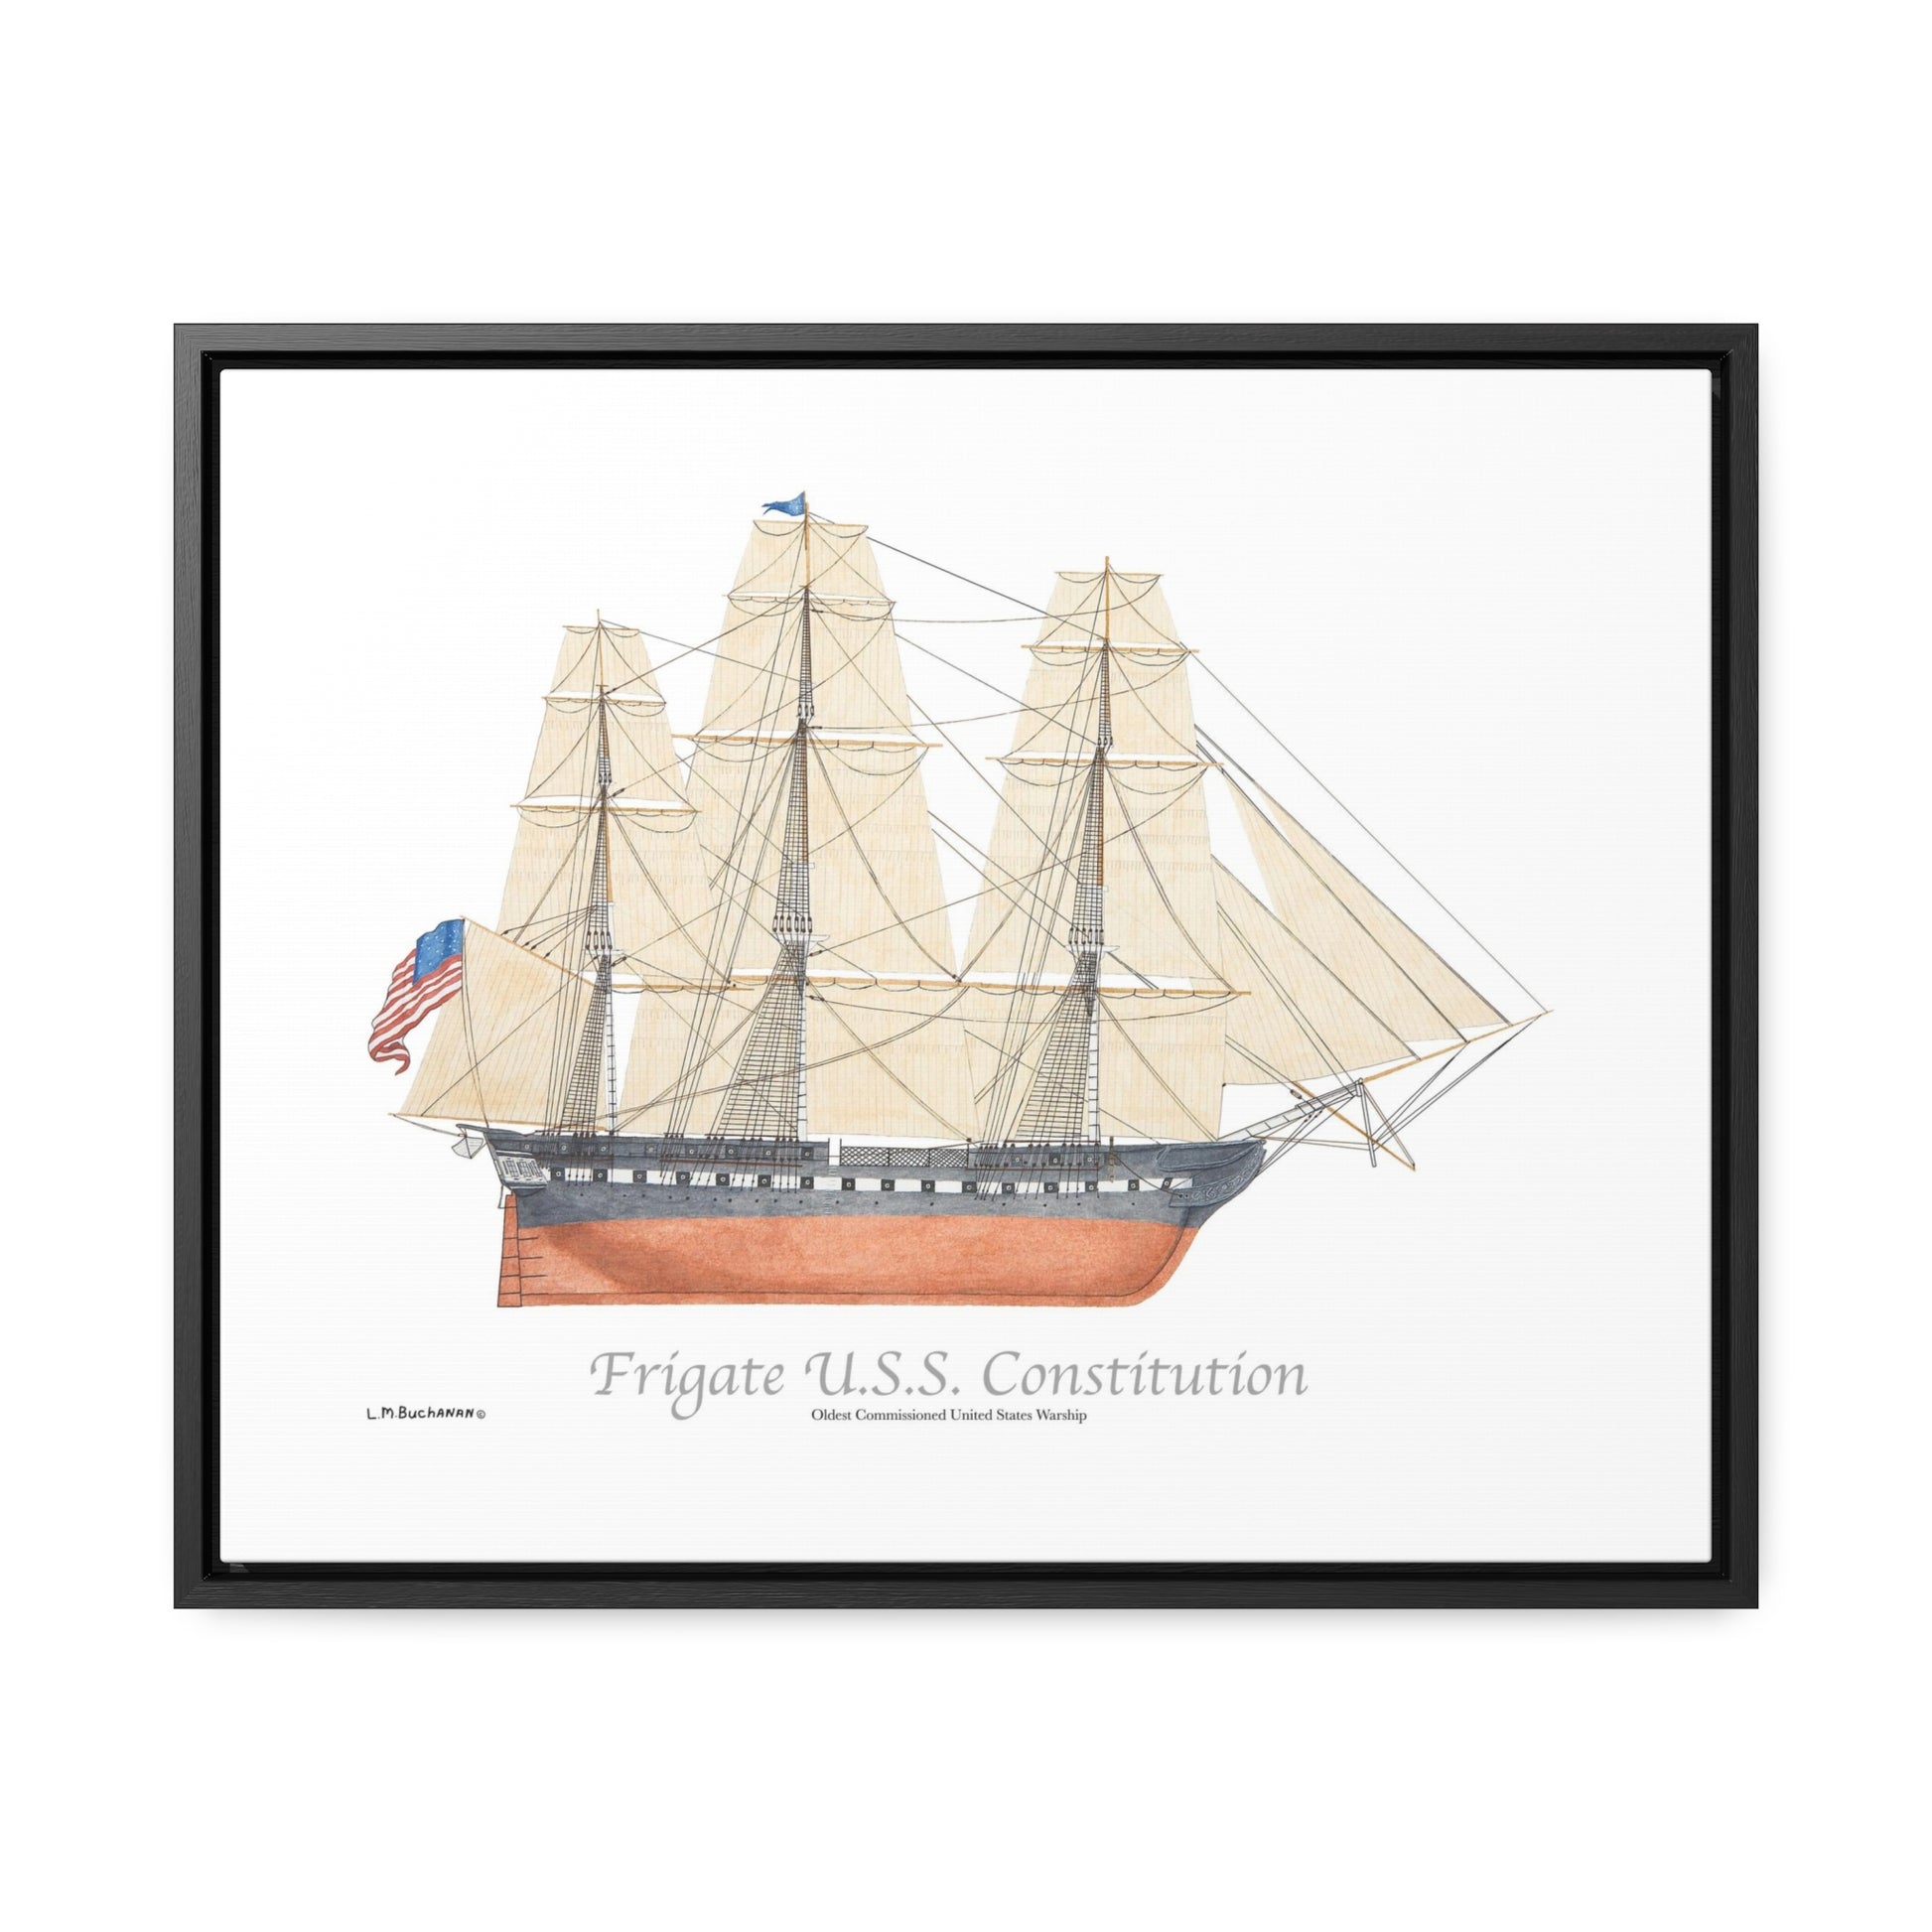 The Frigate U.S.S. Constitution was built in Boston, Massachusetts in 1797 and is the oldest commissioned warship afloat in the world. It is often called by its nickname,“Old Ironsides”. 